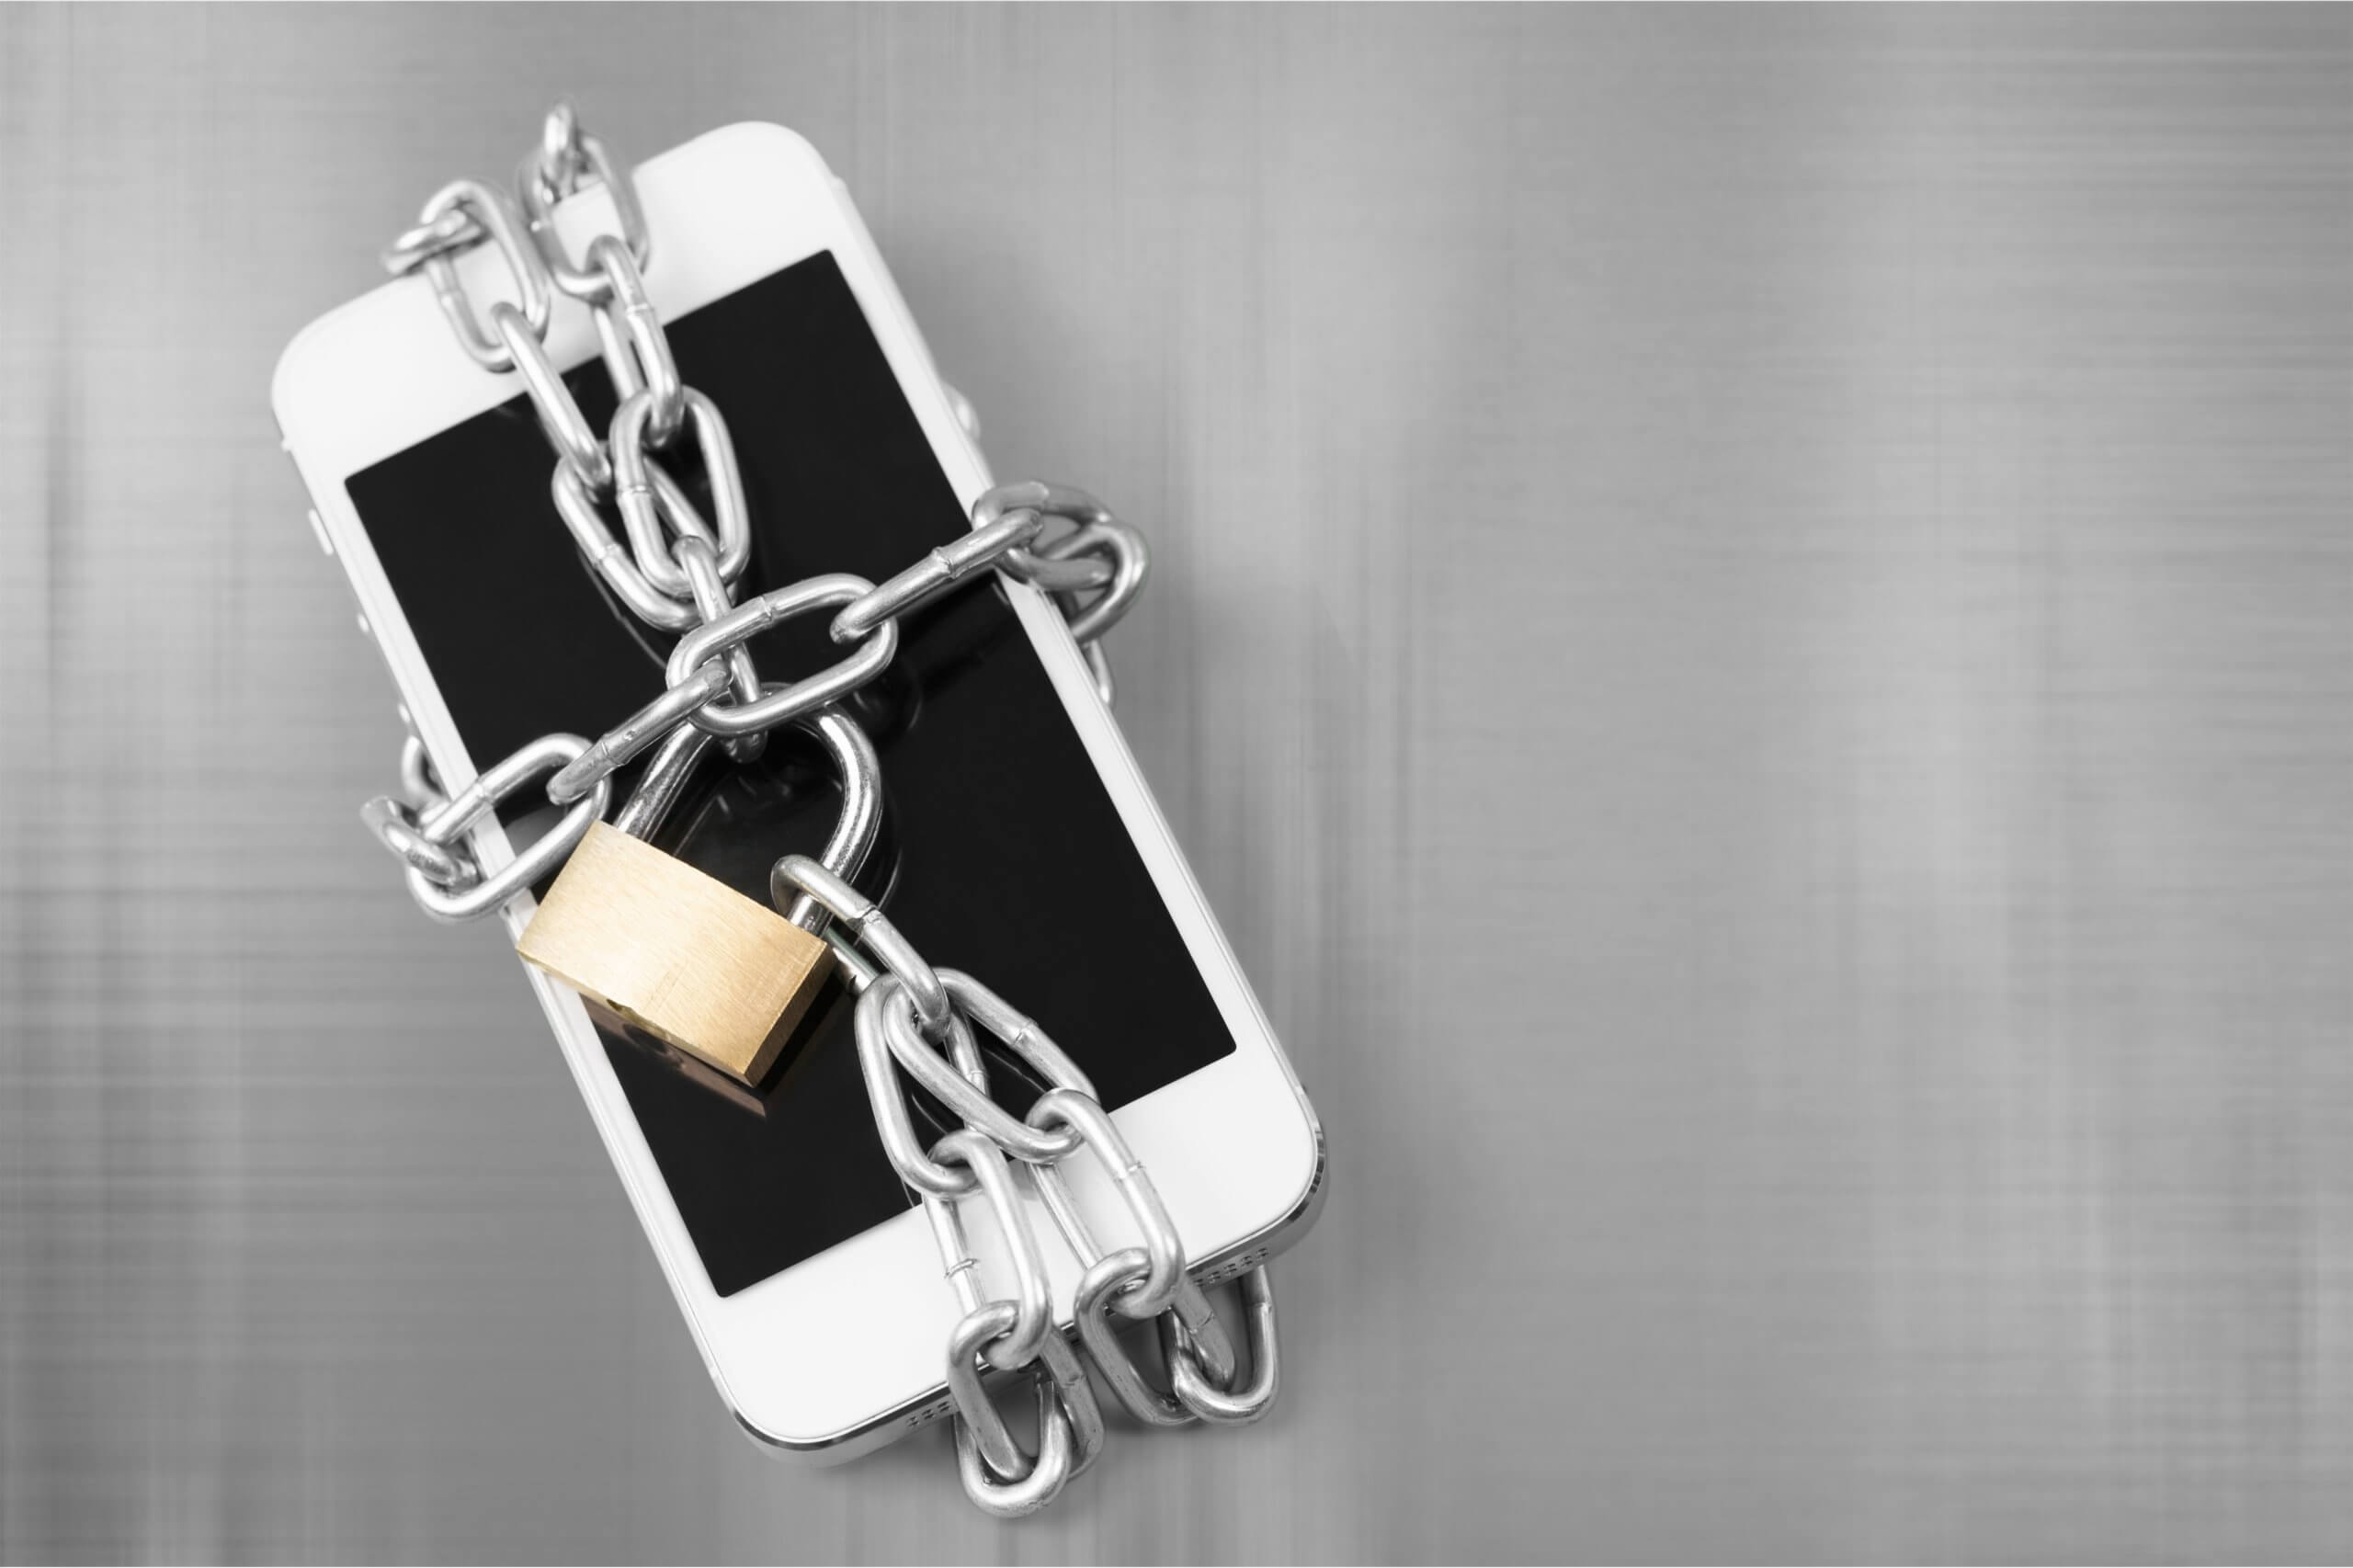 Is it illegal to sell locked iPhone?